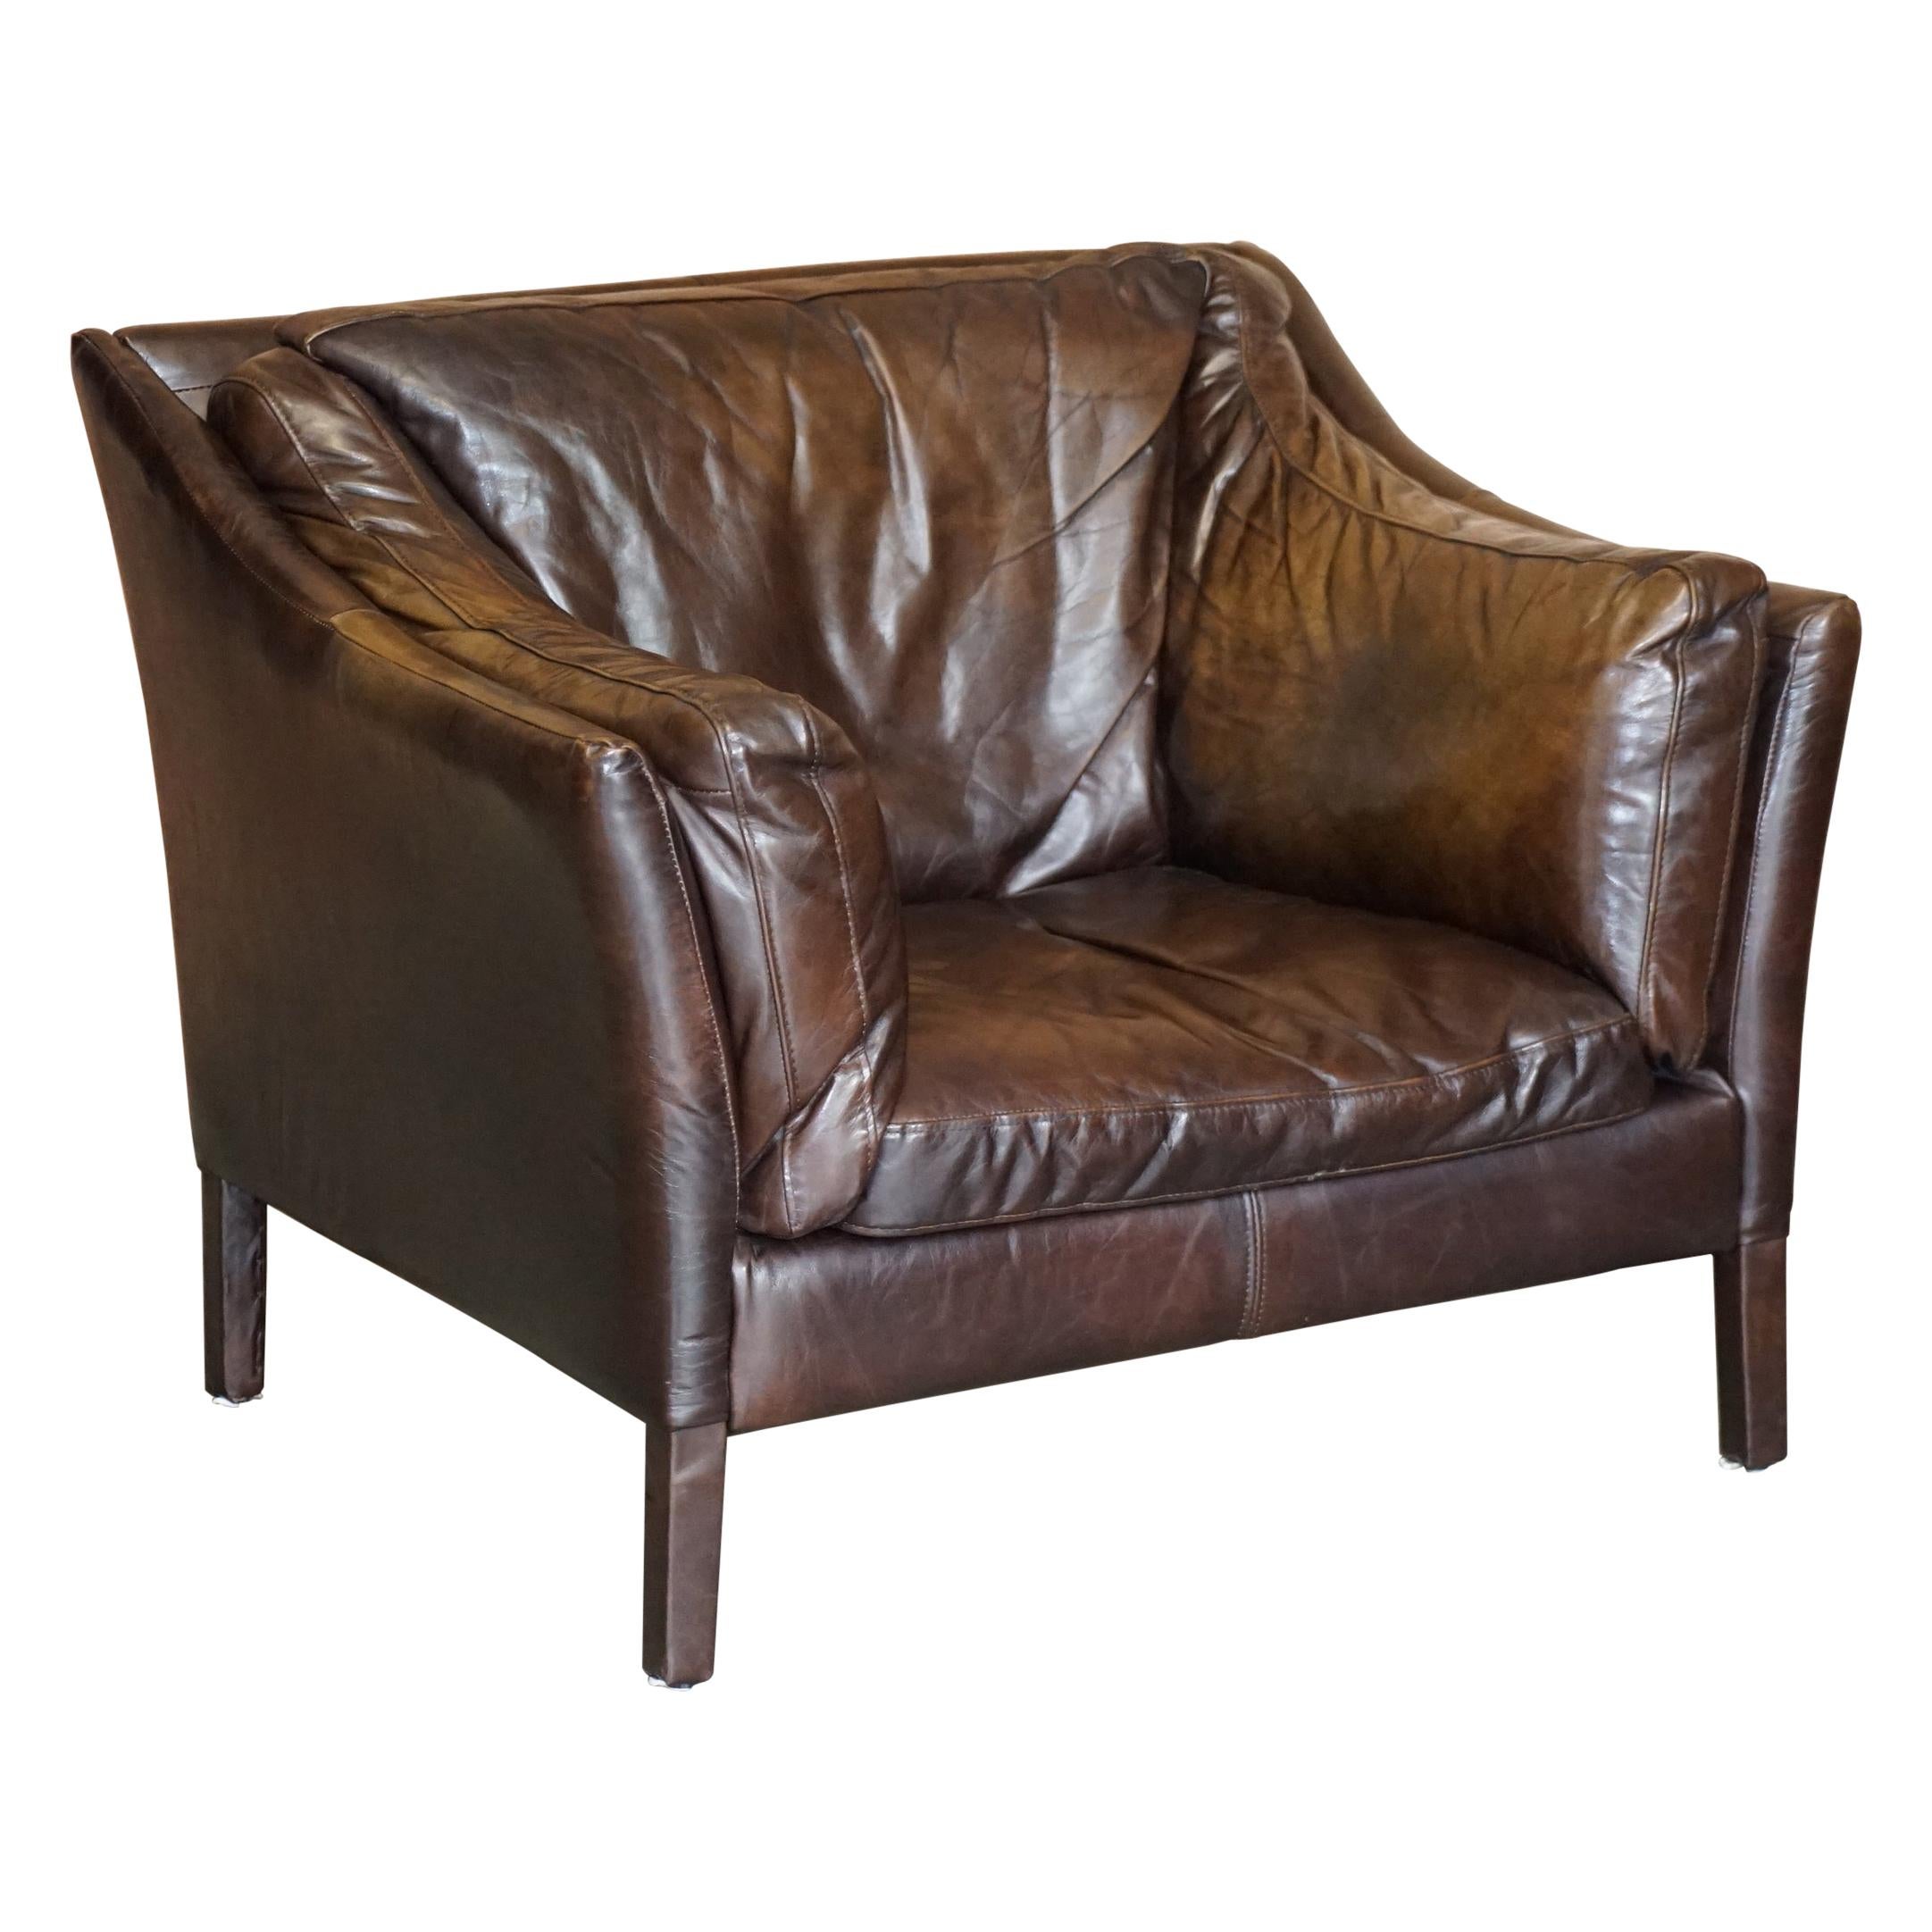 Halo Groucho Bike Tan Brown Leather Armchair Loveseat Part of a Large Suite